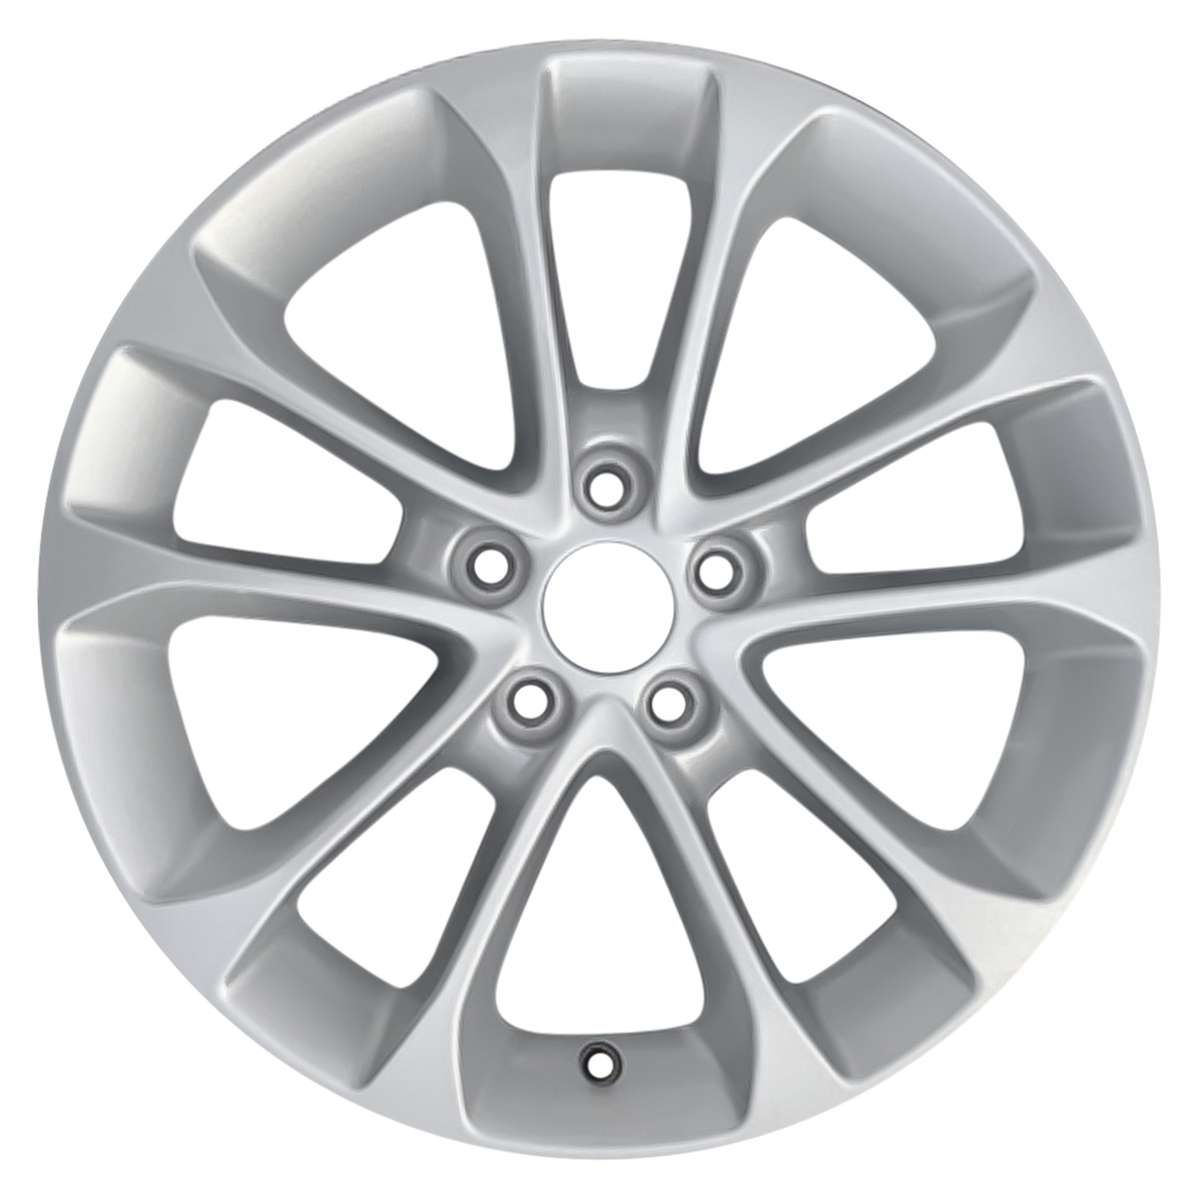 2020 Ford Fusion New 17" Replacement Wheel Rim RW10205S